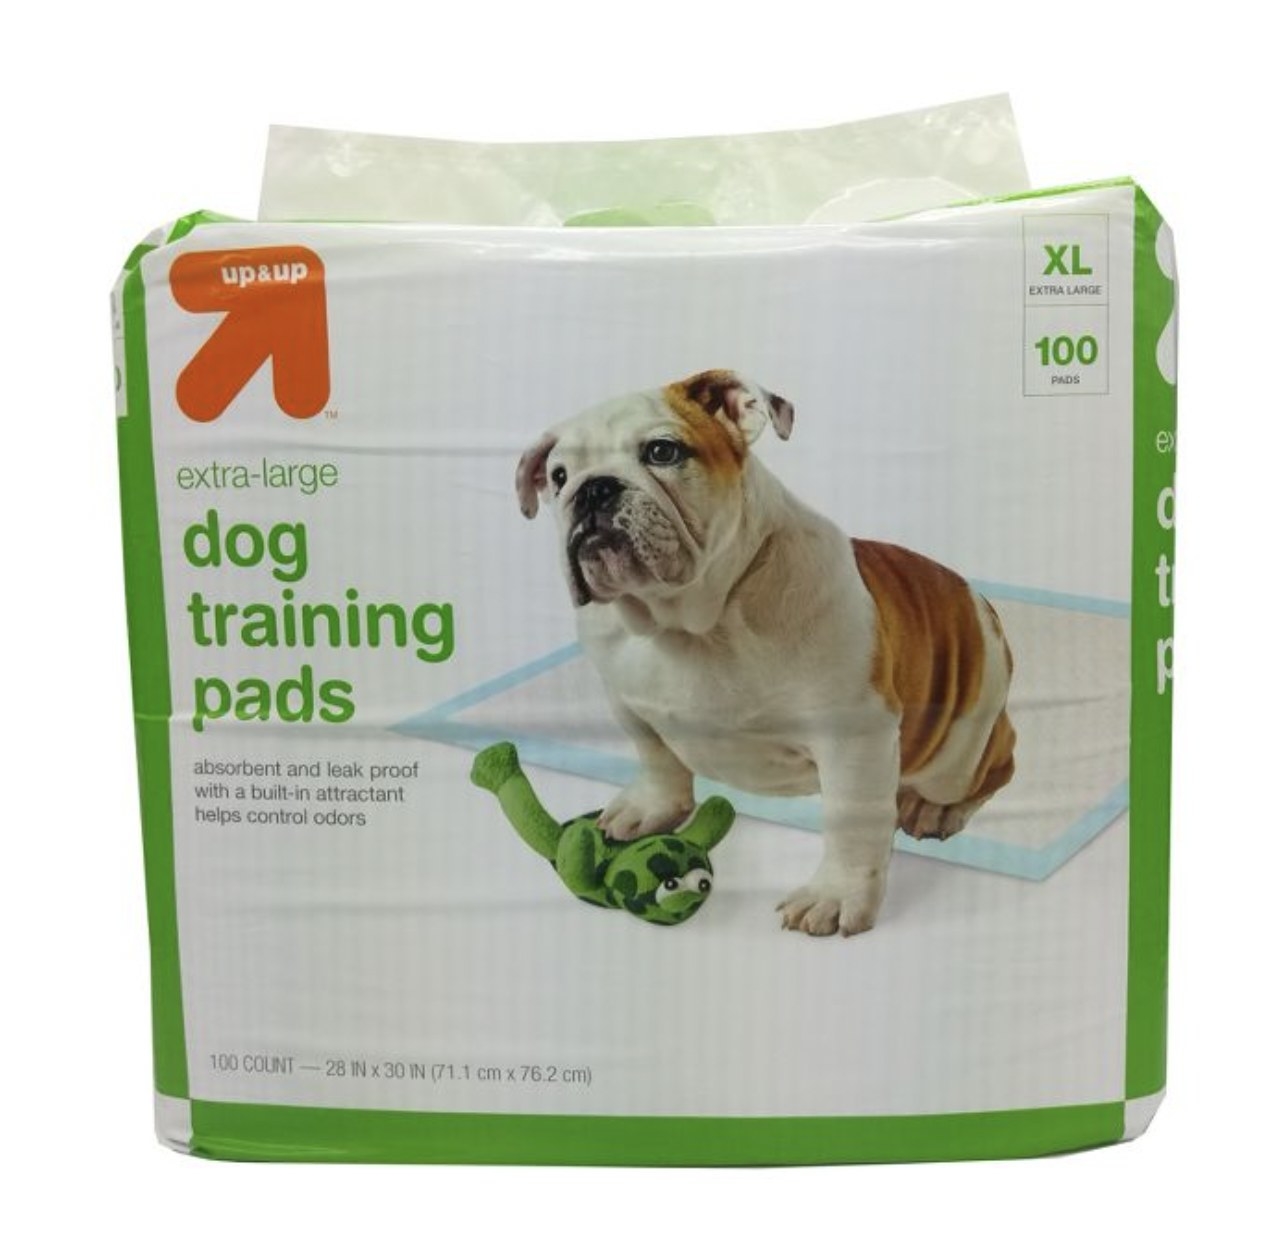 A pack of potty pads